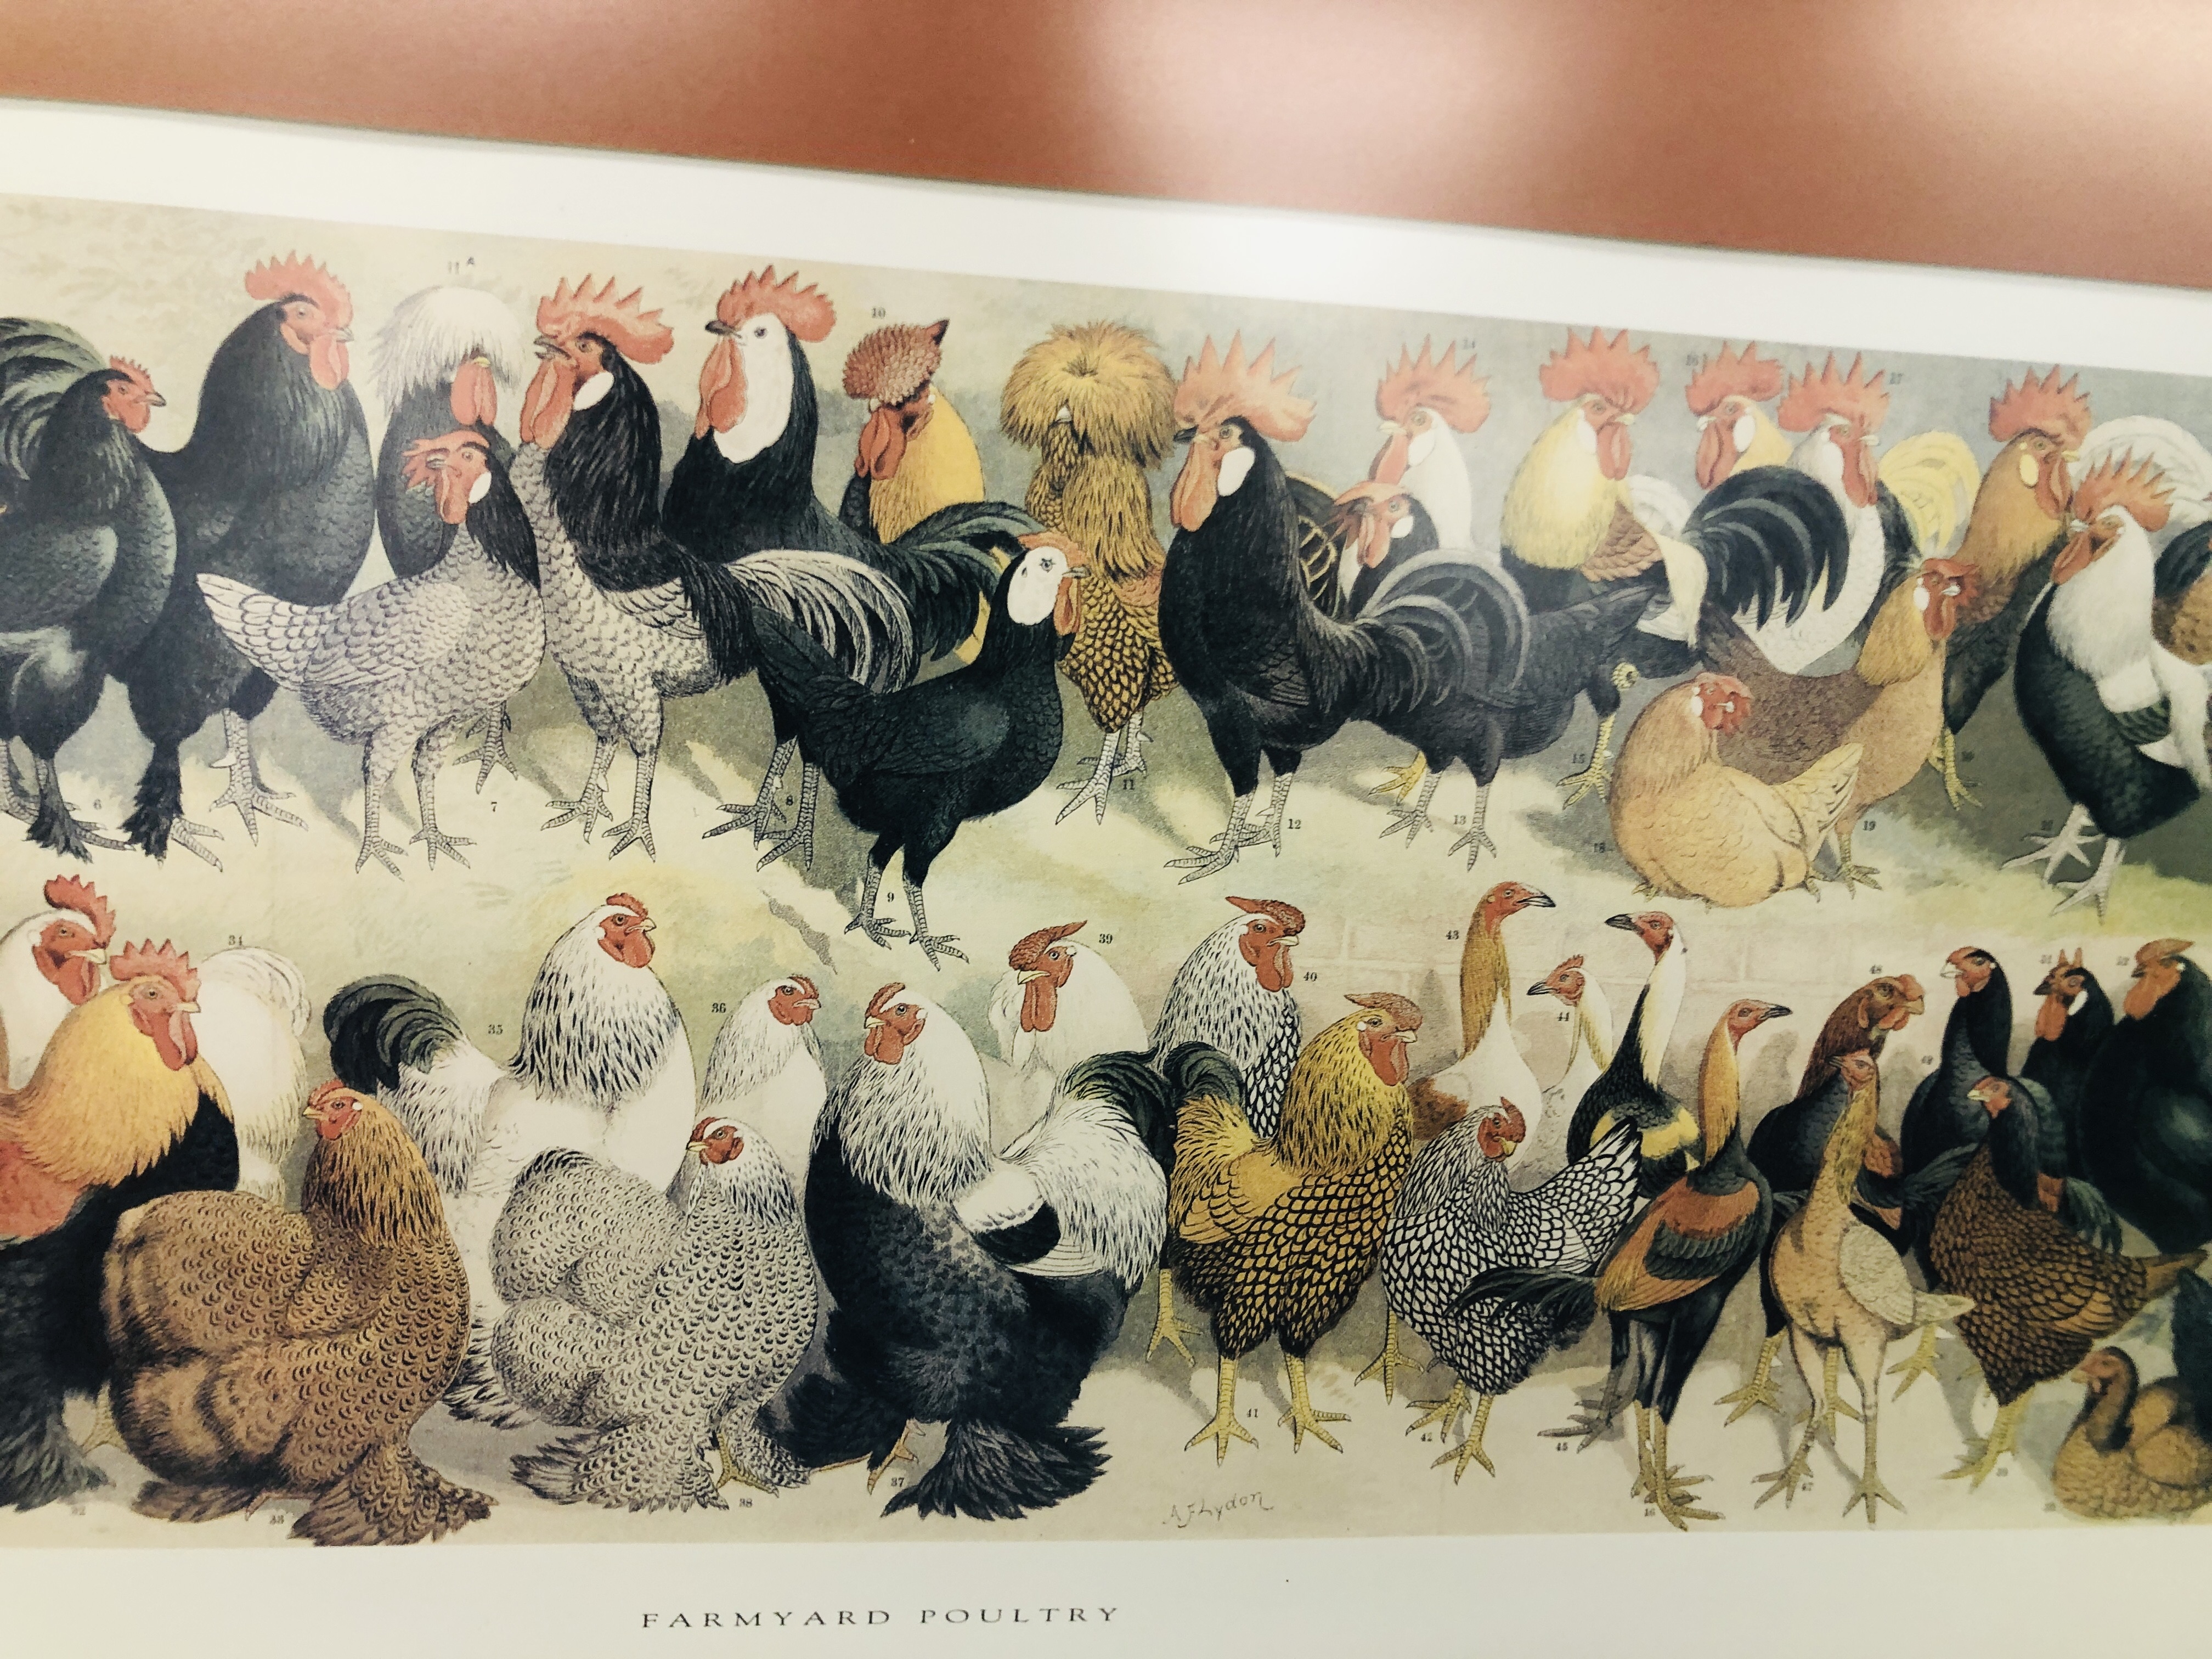 A FARMYARD POULTRY PRINT MOUNTED IN GILT FRAME - Image 3 of 5